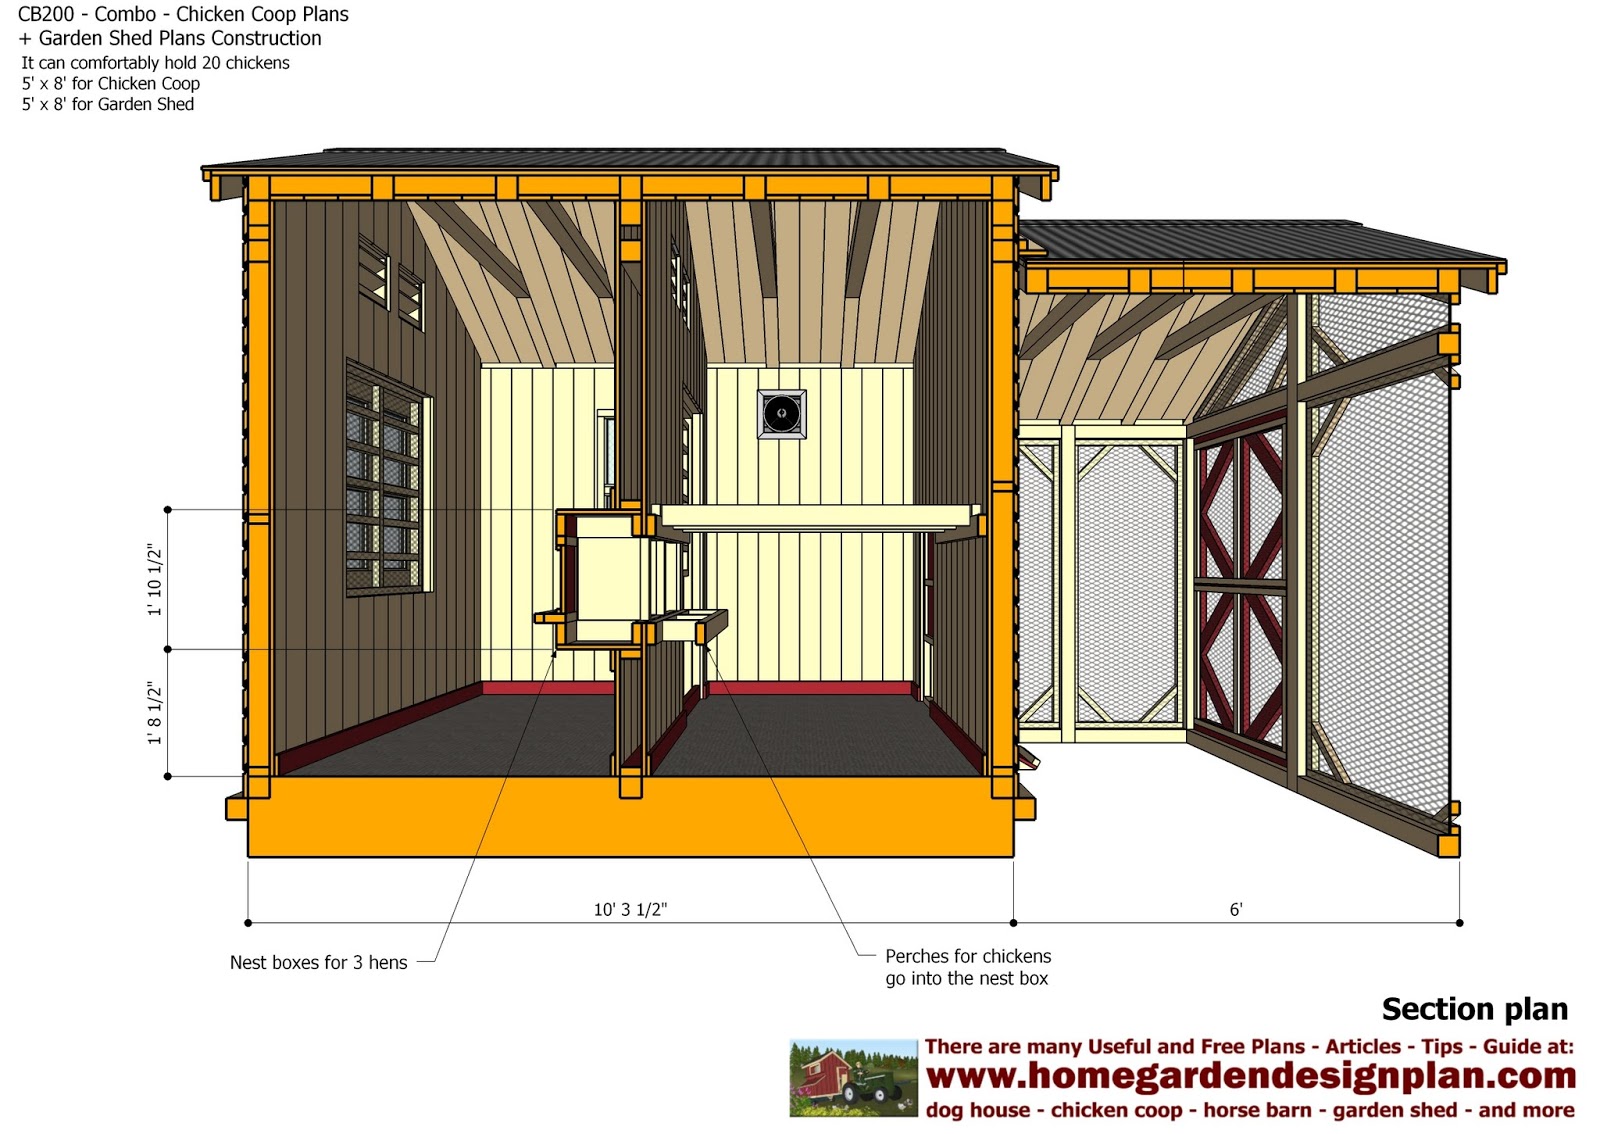 Garden Shed Construction Plans